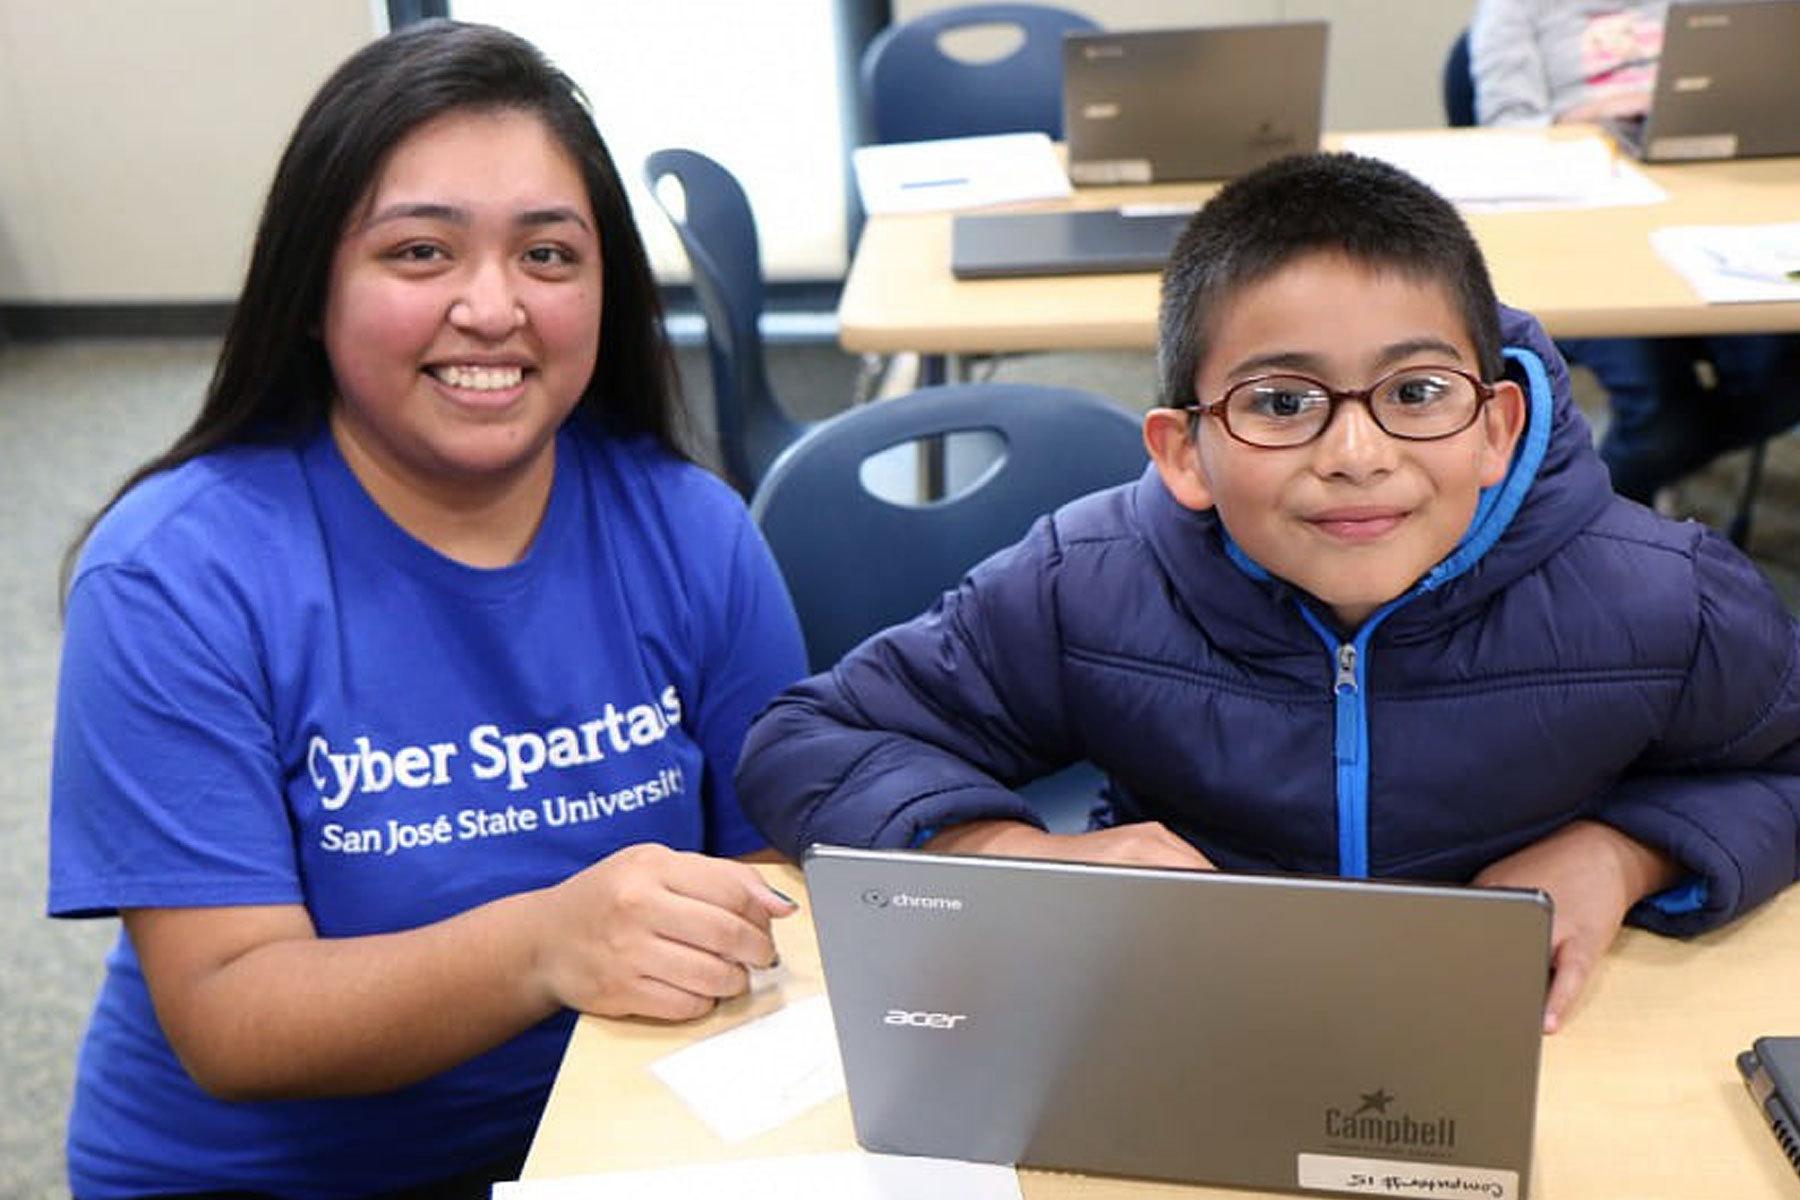 Cyber Spartans Encourage Next Generation of Coders.